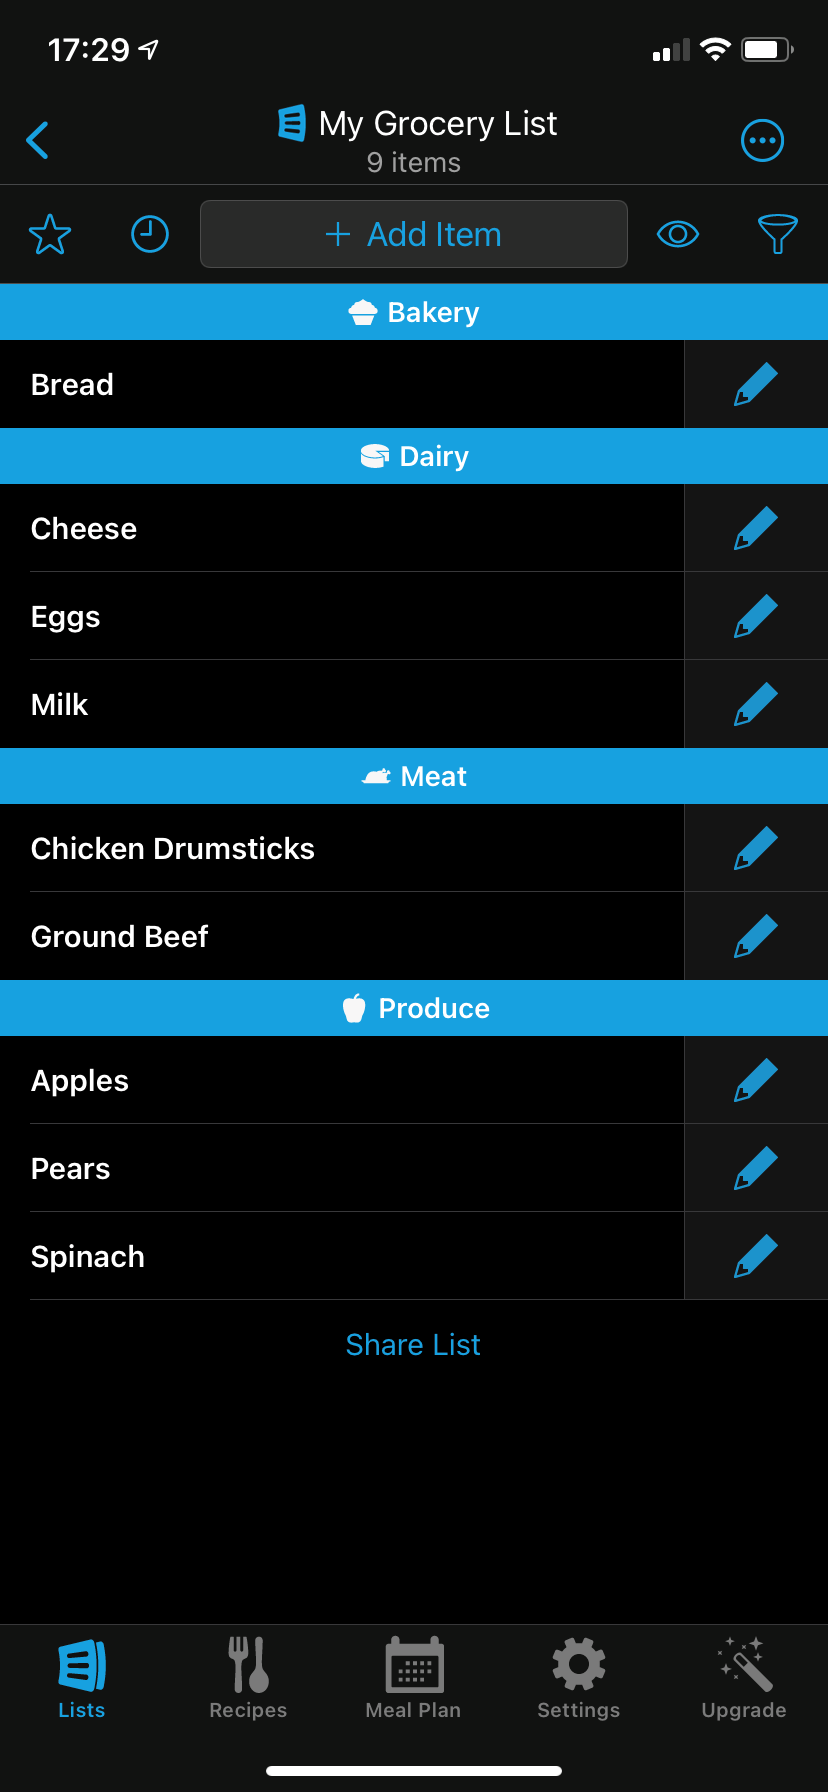 AnyList grocery list with items added